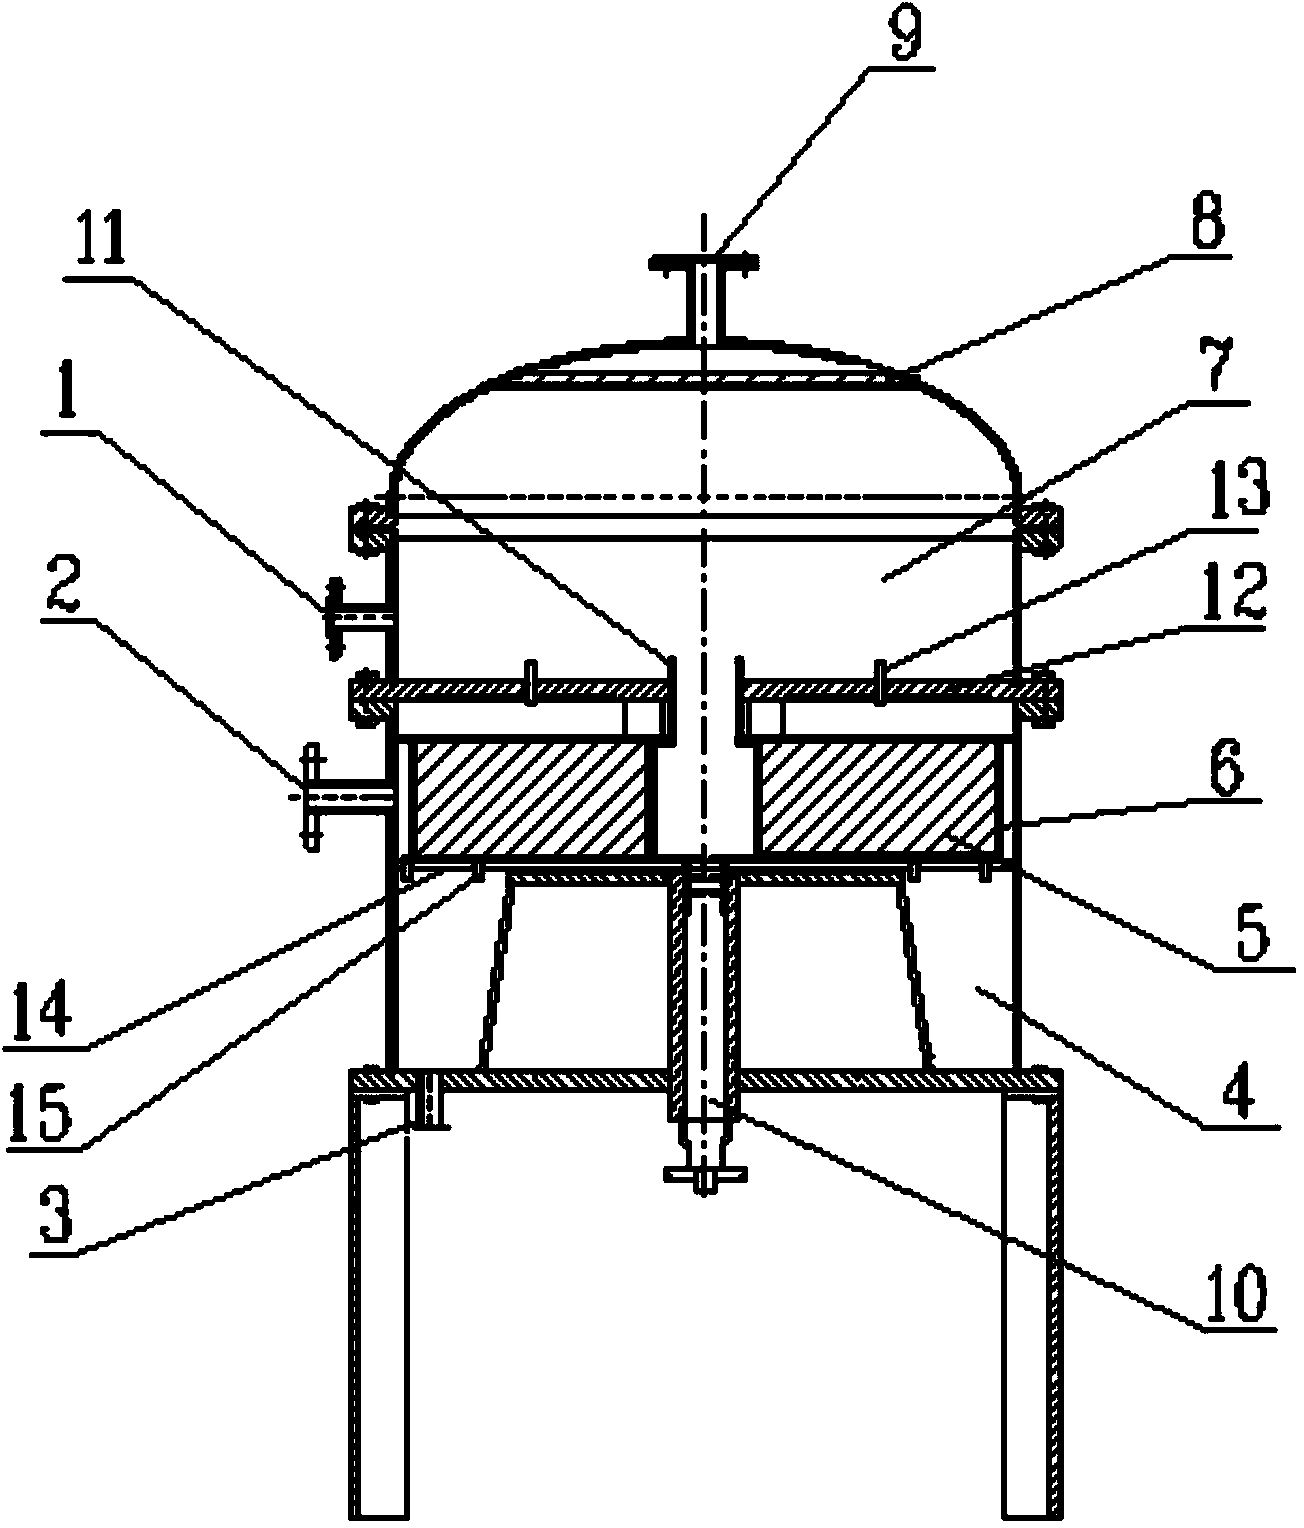 Raw oil associated gas supergravity separation device